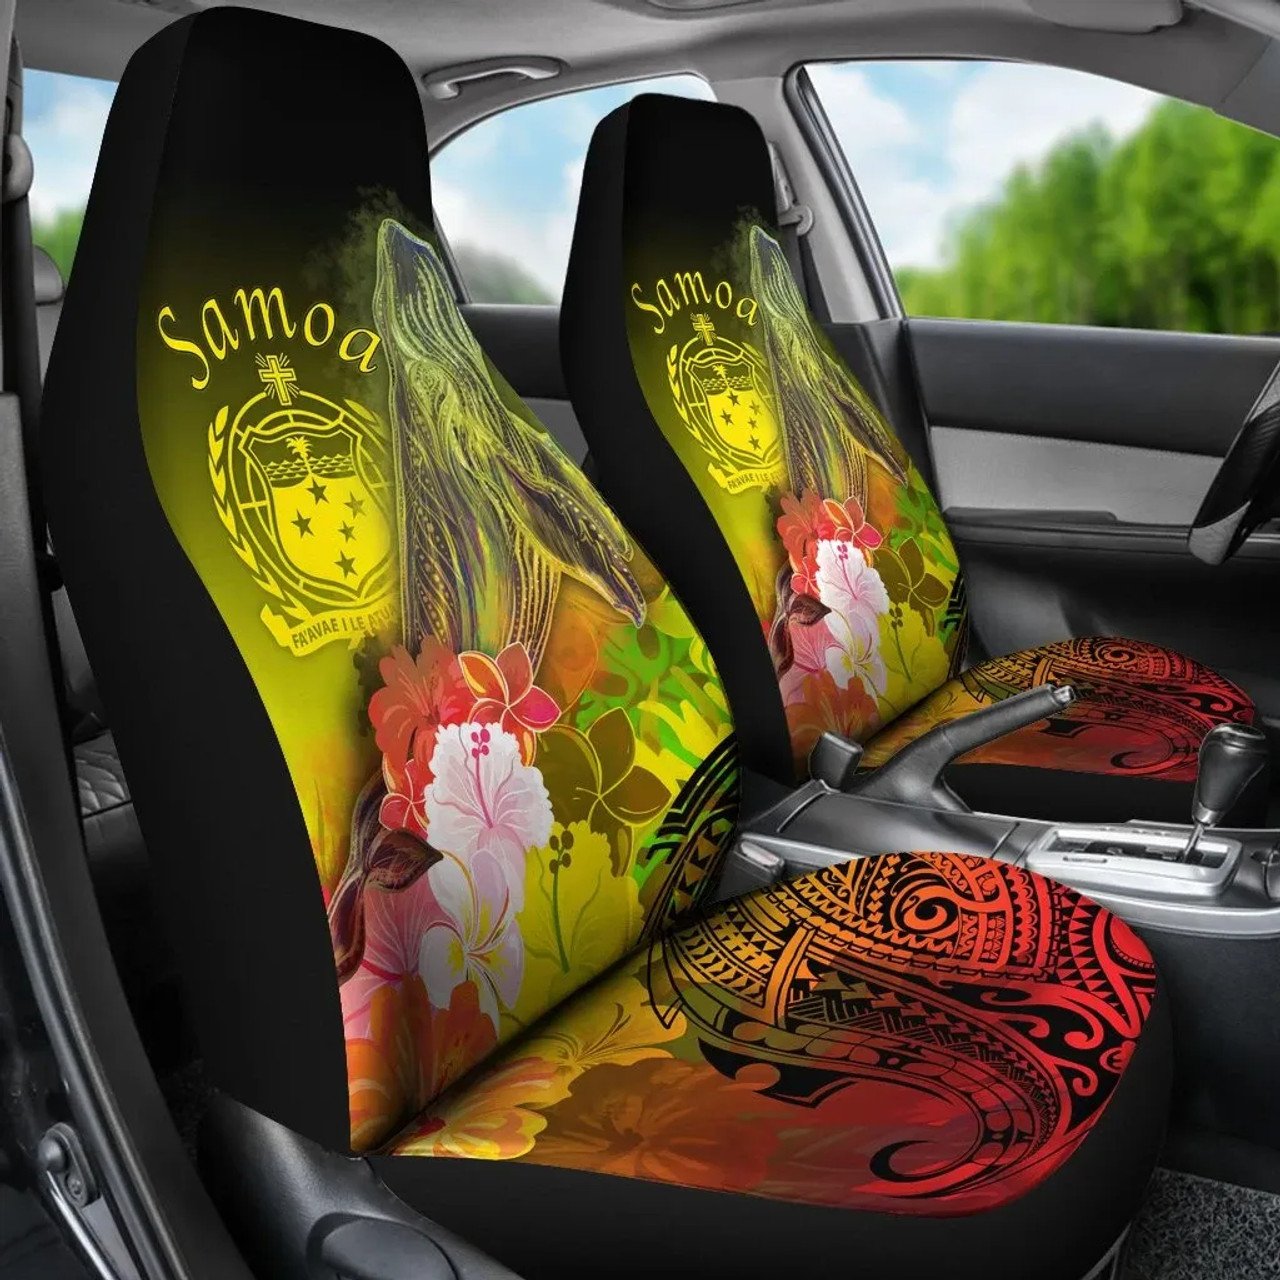 Samoa Car Seat Covers- Humpback Whale with Tropical Flowers (Yellow)